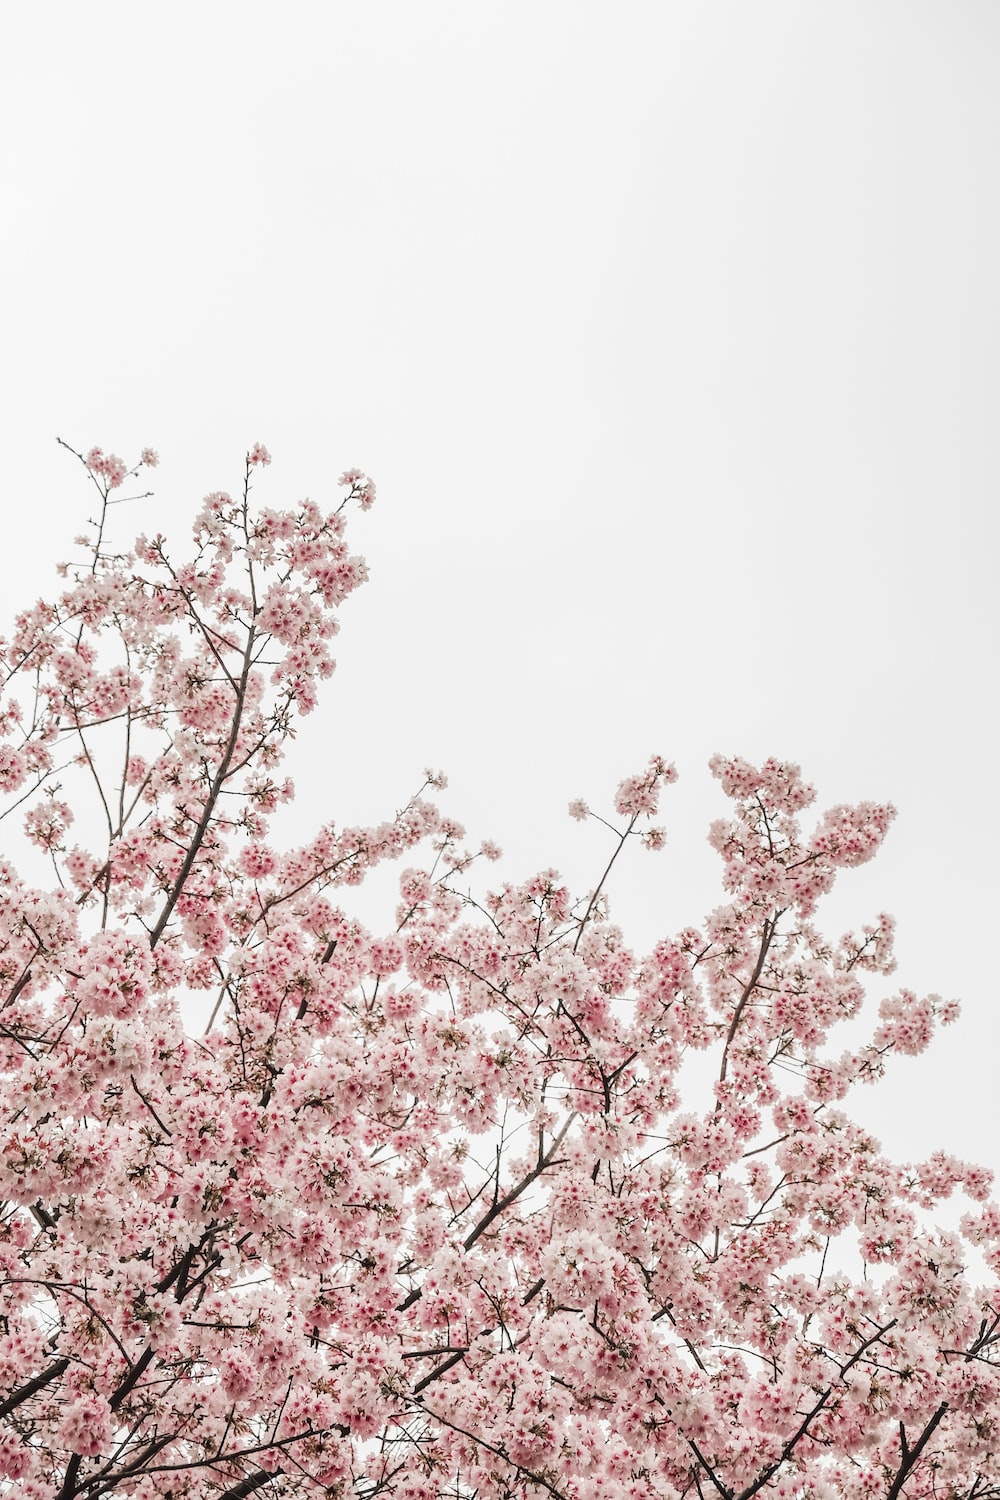 Best sakura tree pictures hd download free images on